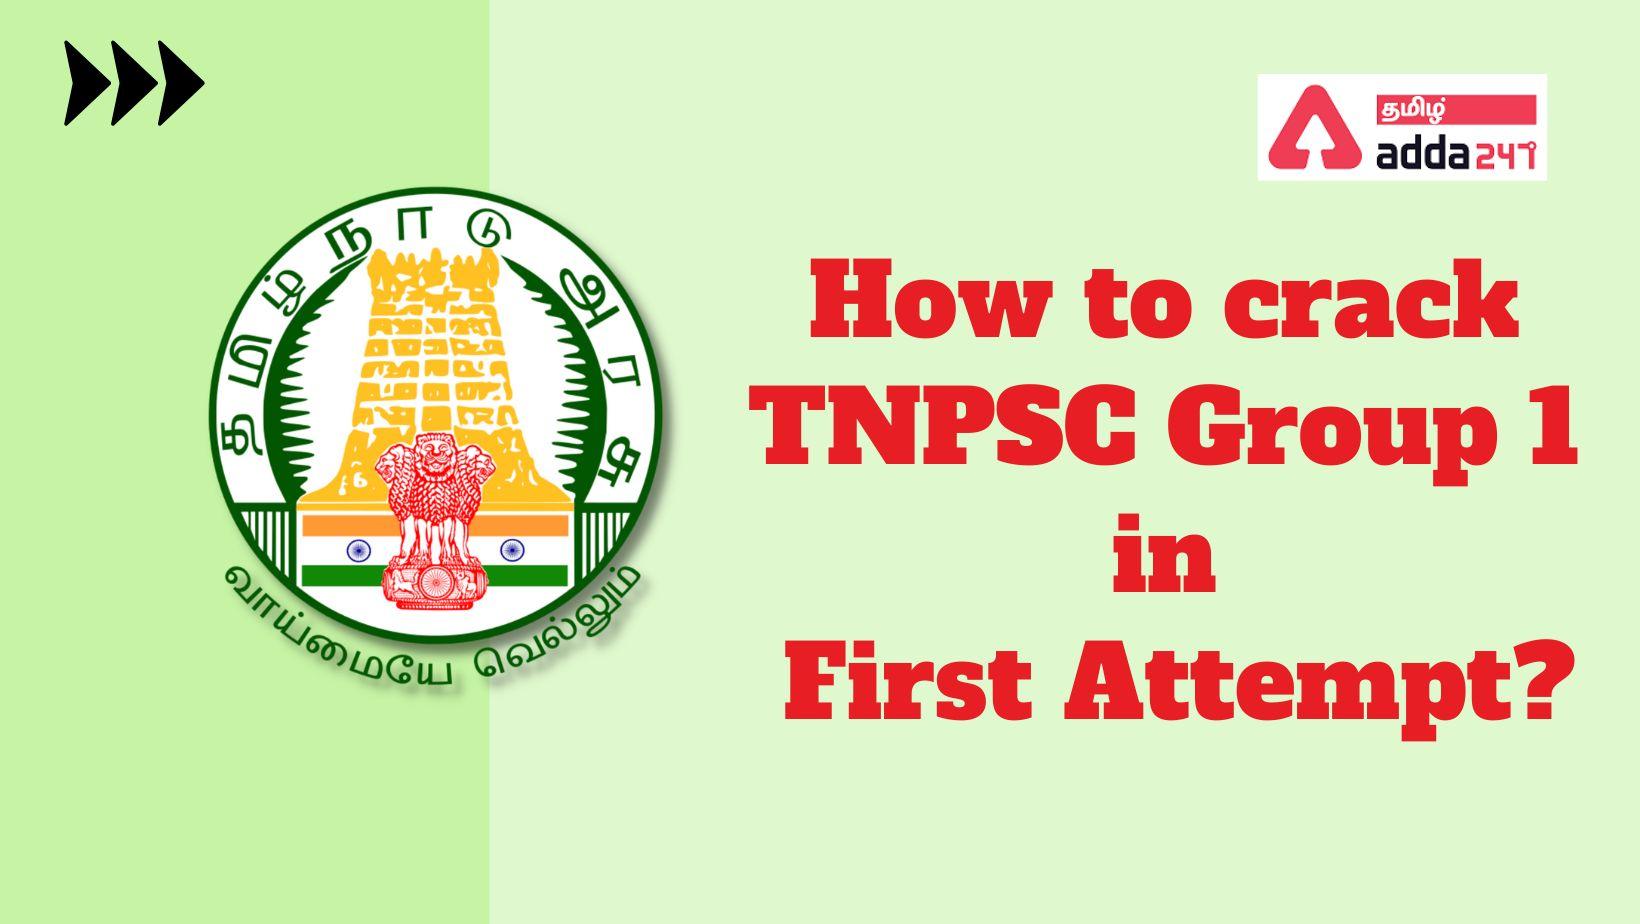 How to crack TNPSC Group 1 in First Attempt?